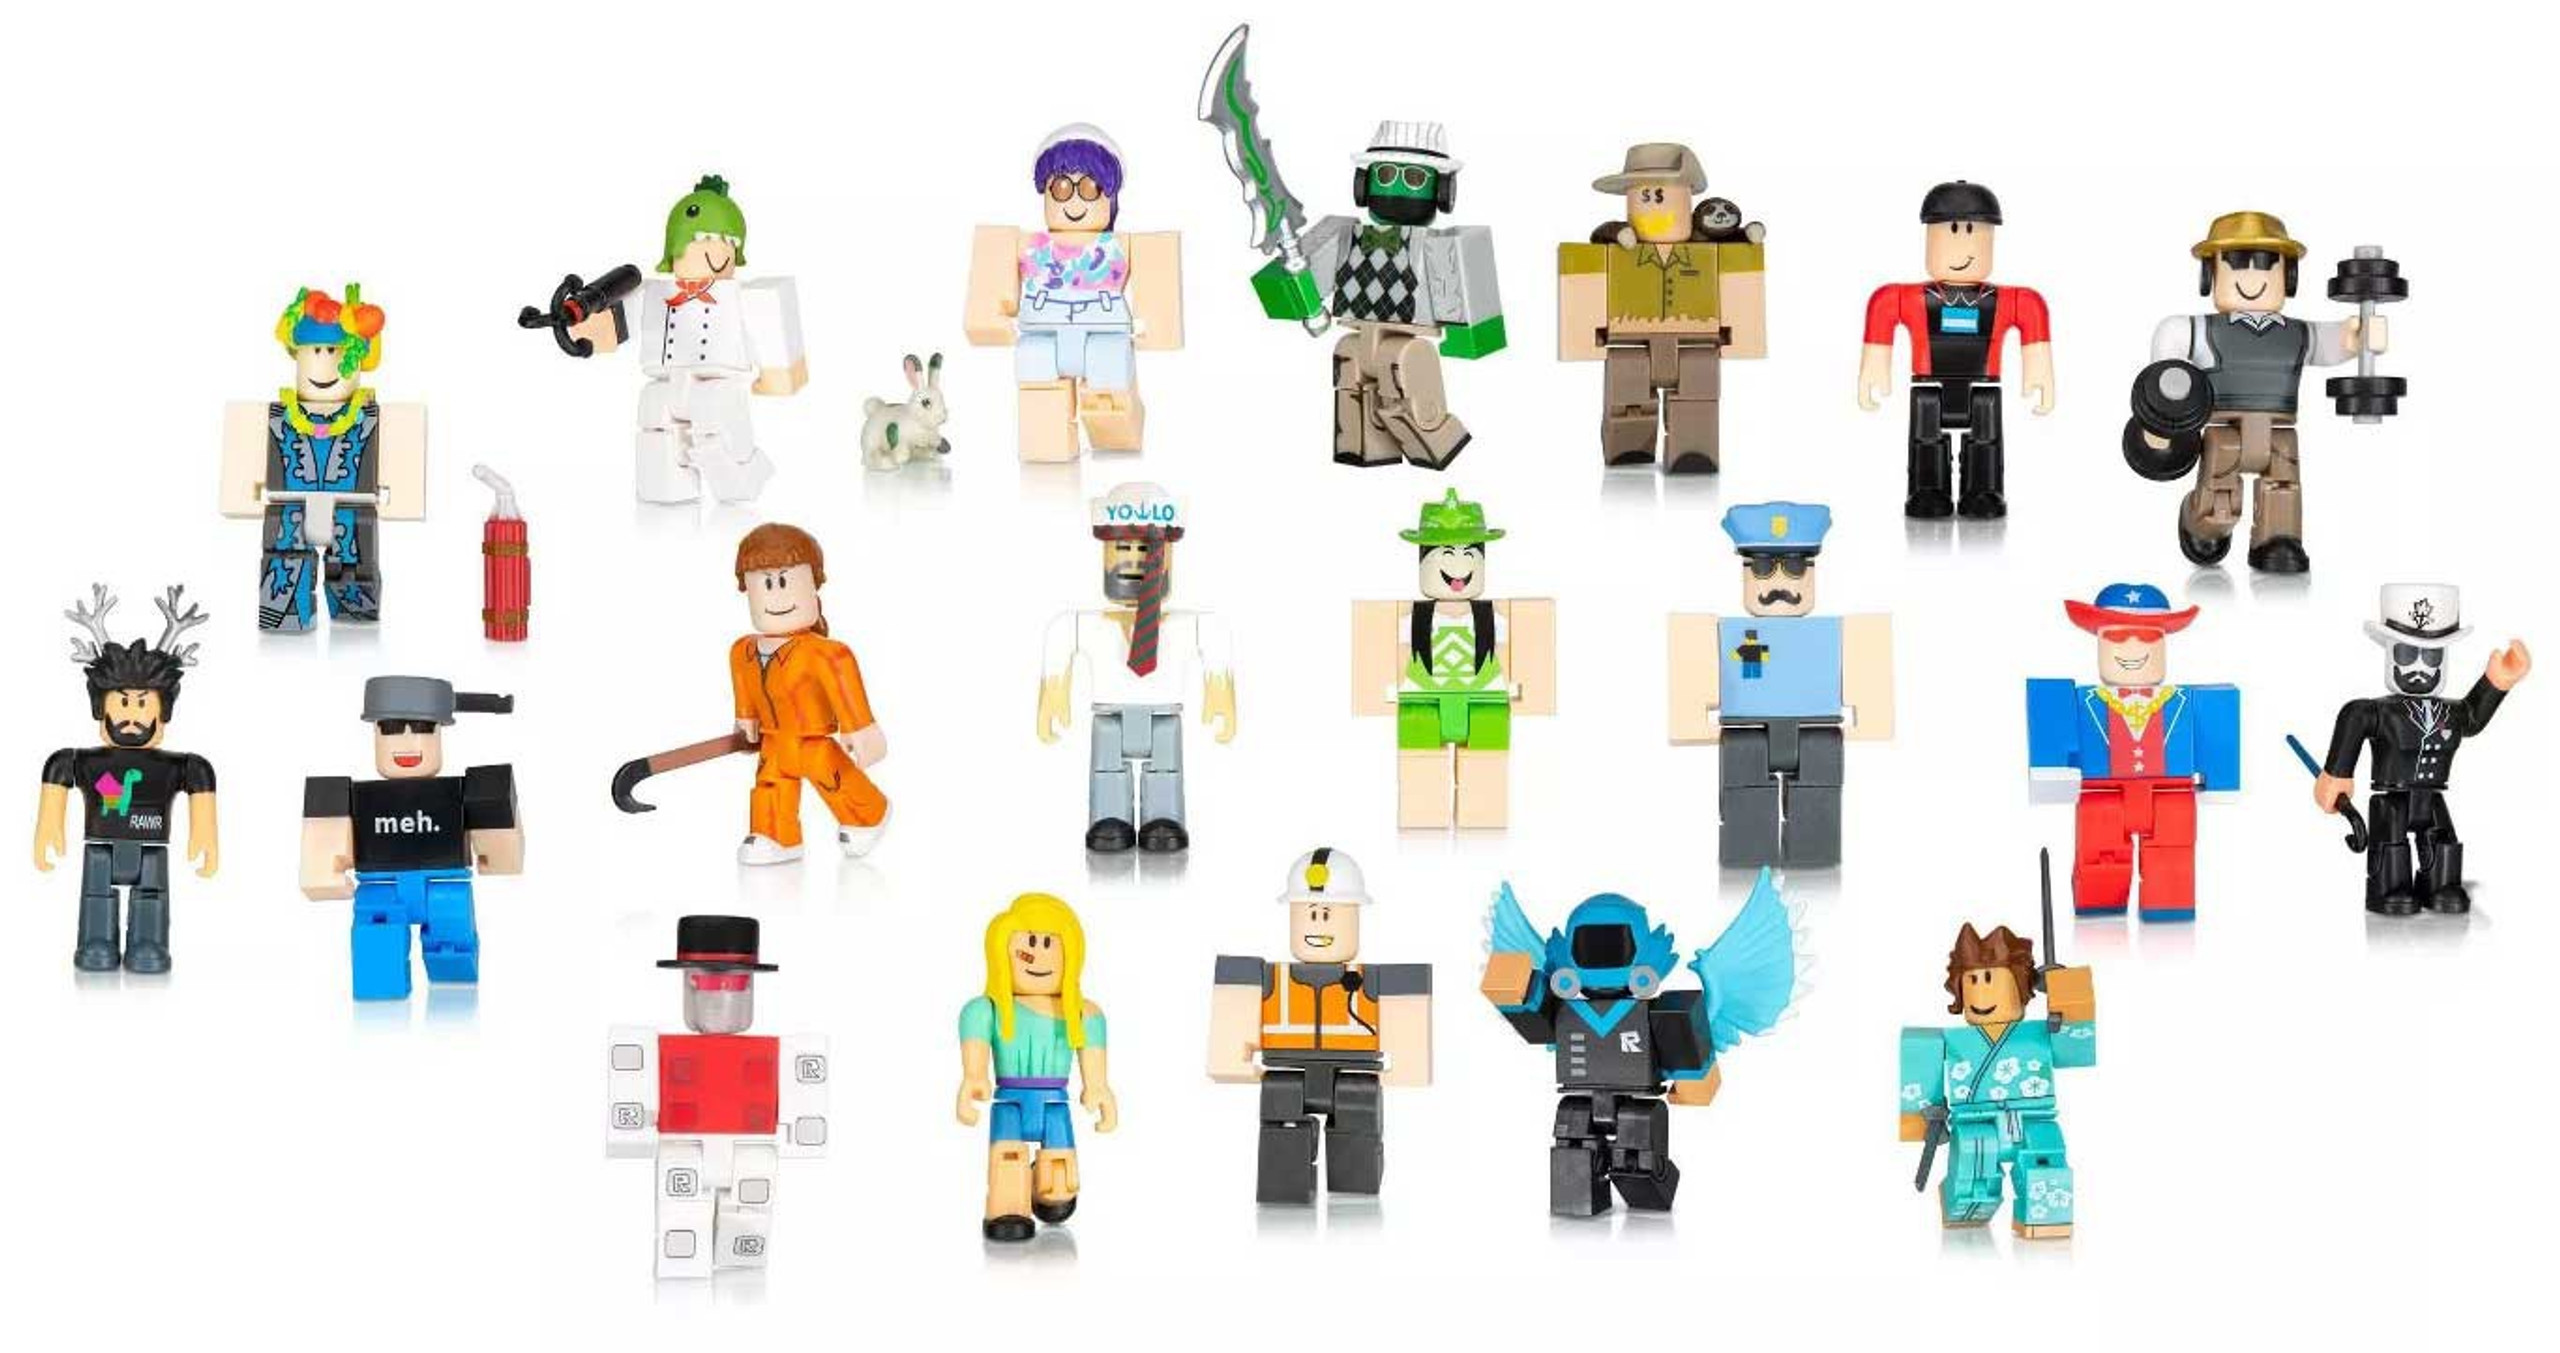 Roblox Action Collection From The Vault 3 20-Figure Set Jazwares - ToyWiz